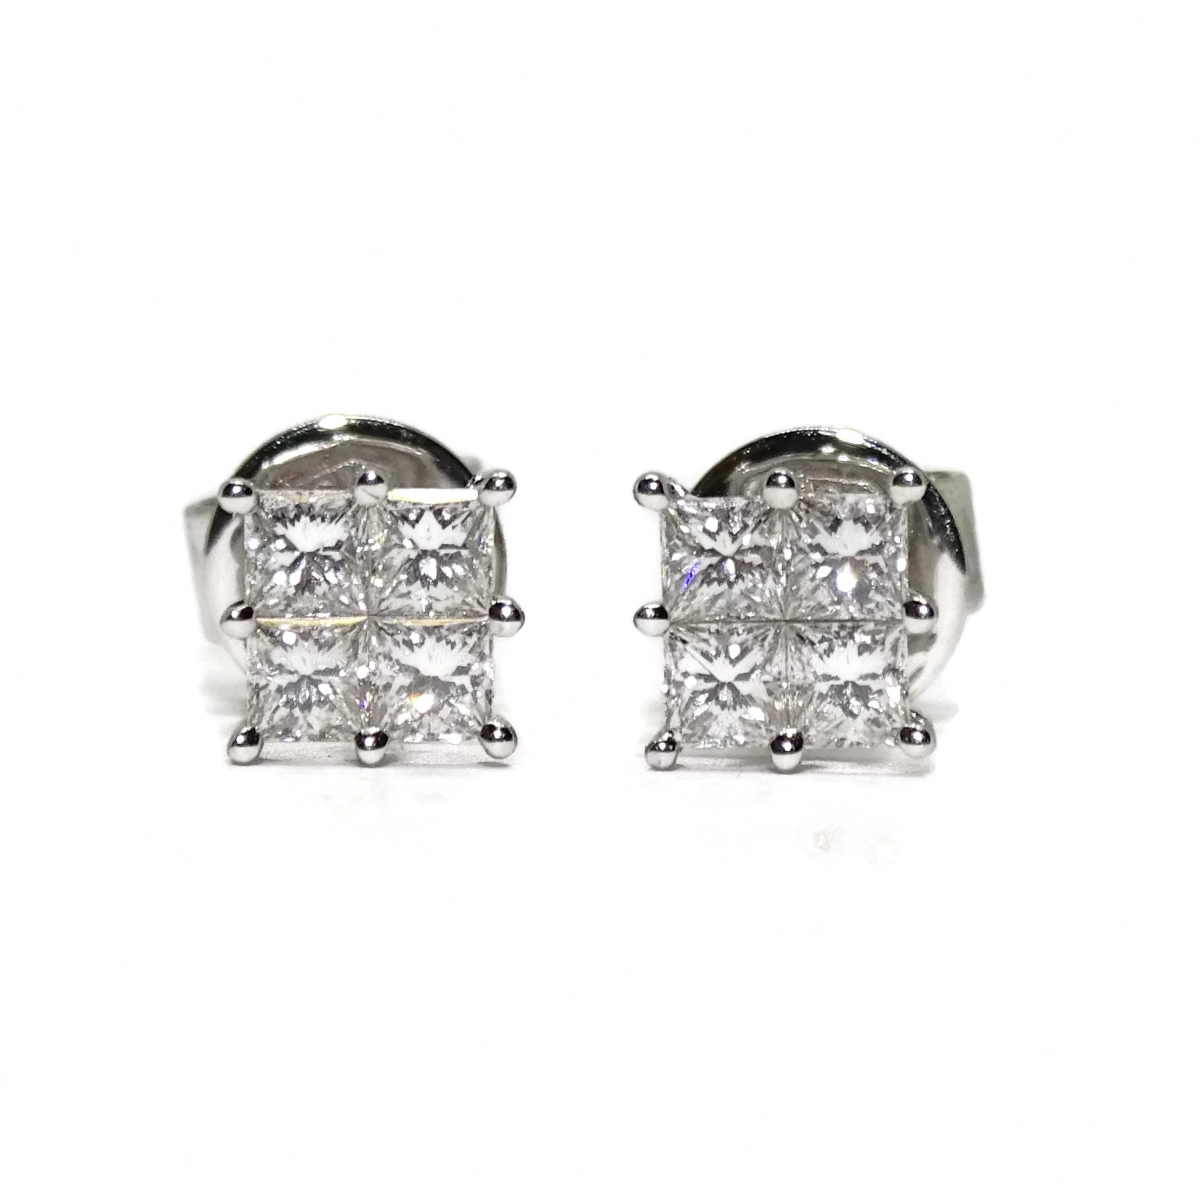 EARRINGS 0.75 CTS OF DIAMONDS PRINCESS CUT. 6MM X 6MM. PRESSURE NEVER SAY NEVER